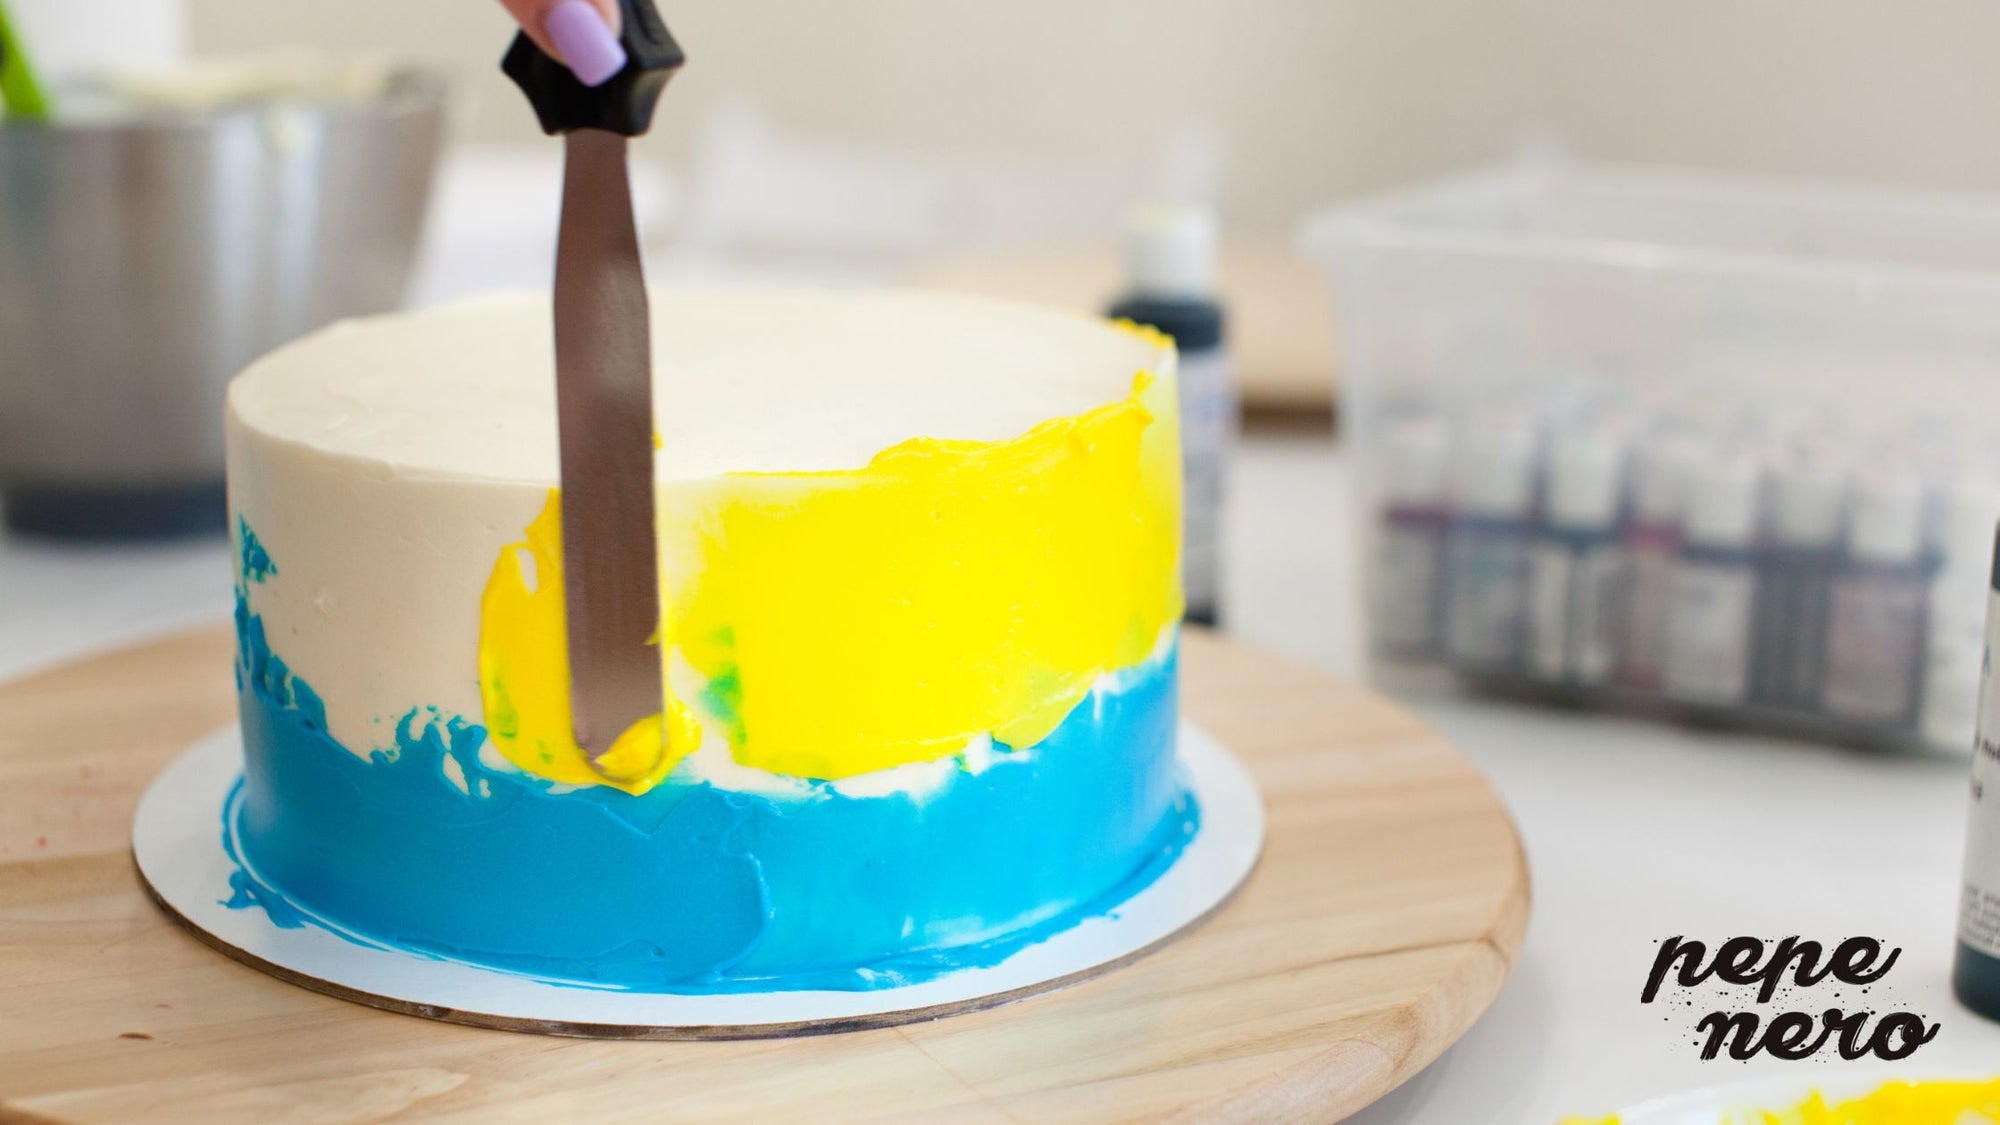 A cake with white icing being decorated with blue and yellow icing.